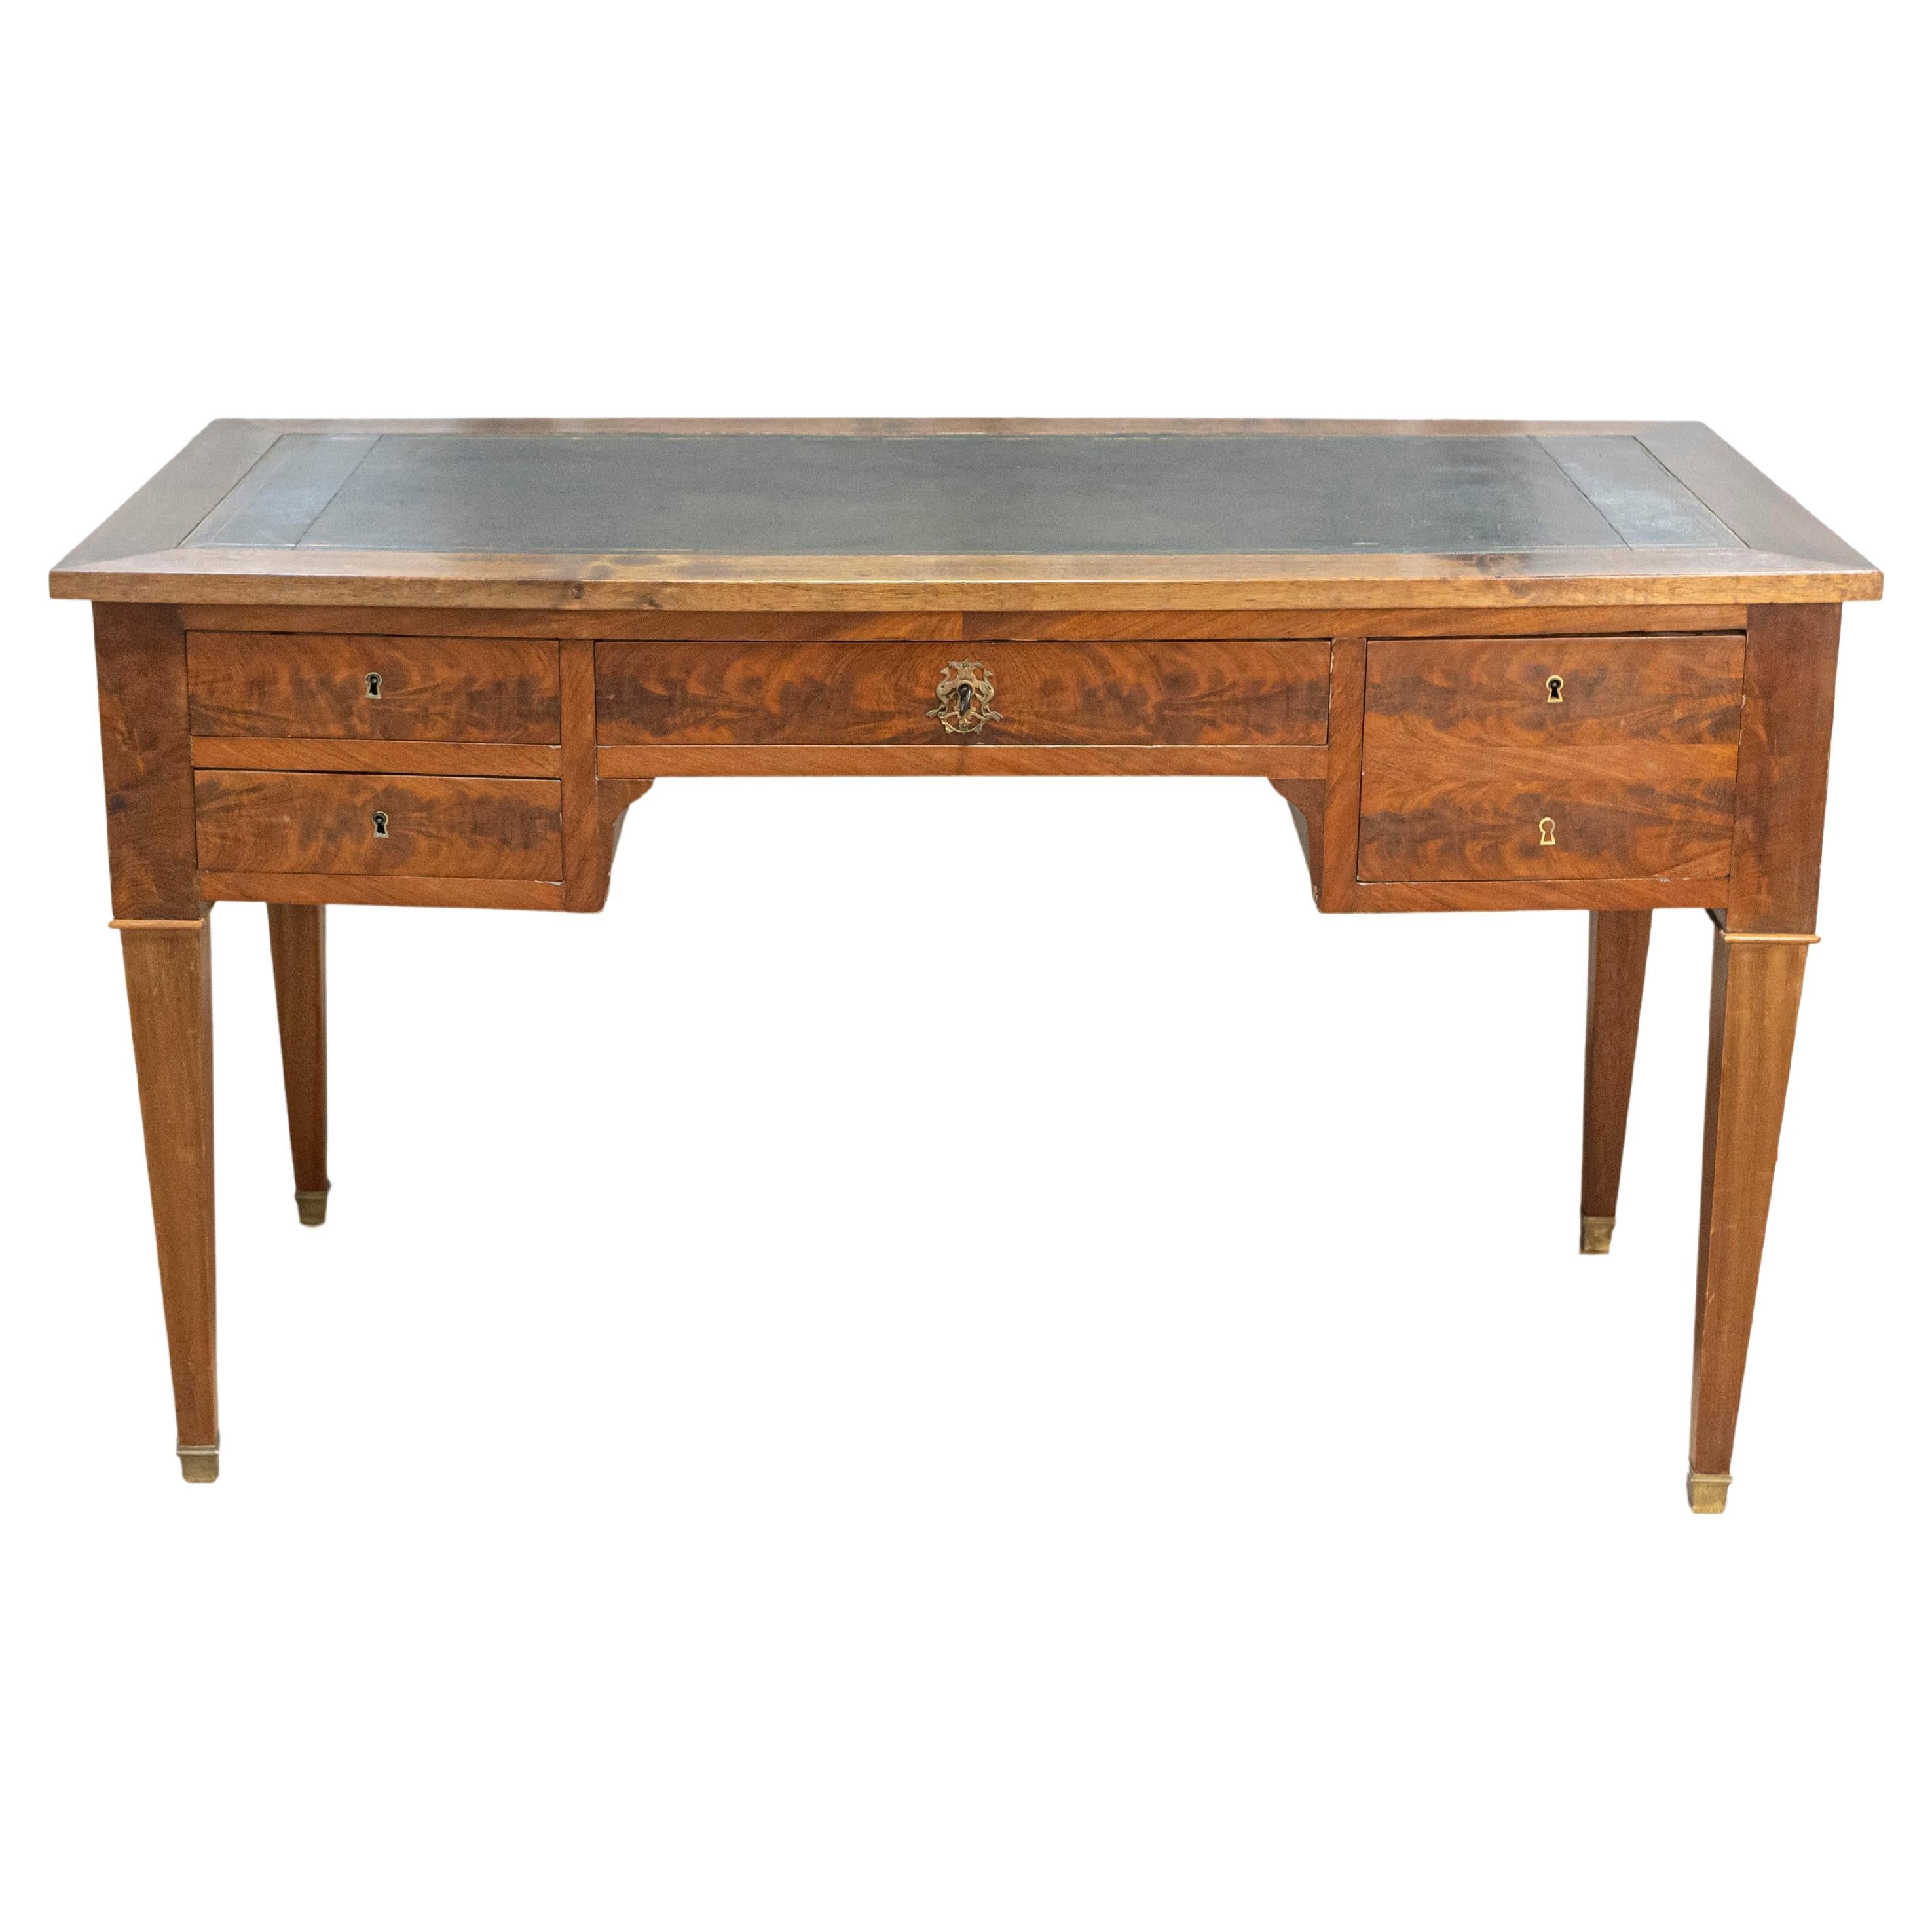 French Louis XVI Style 19th Century Walnut Leather Top Desk with Four Drawers